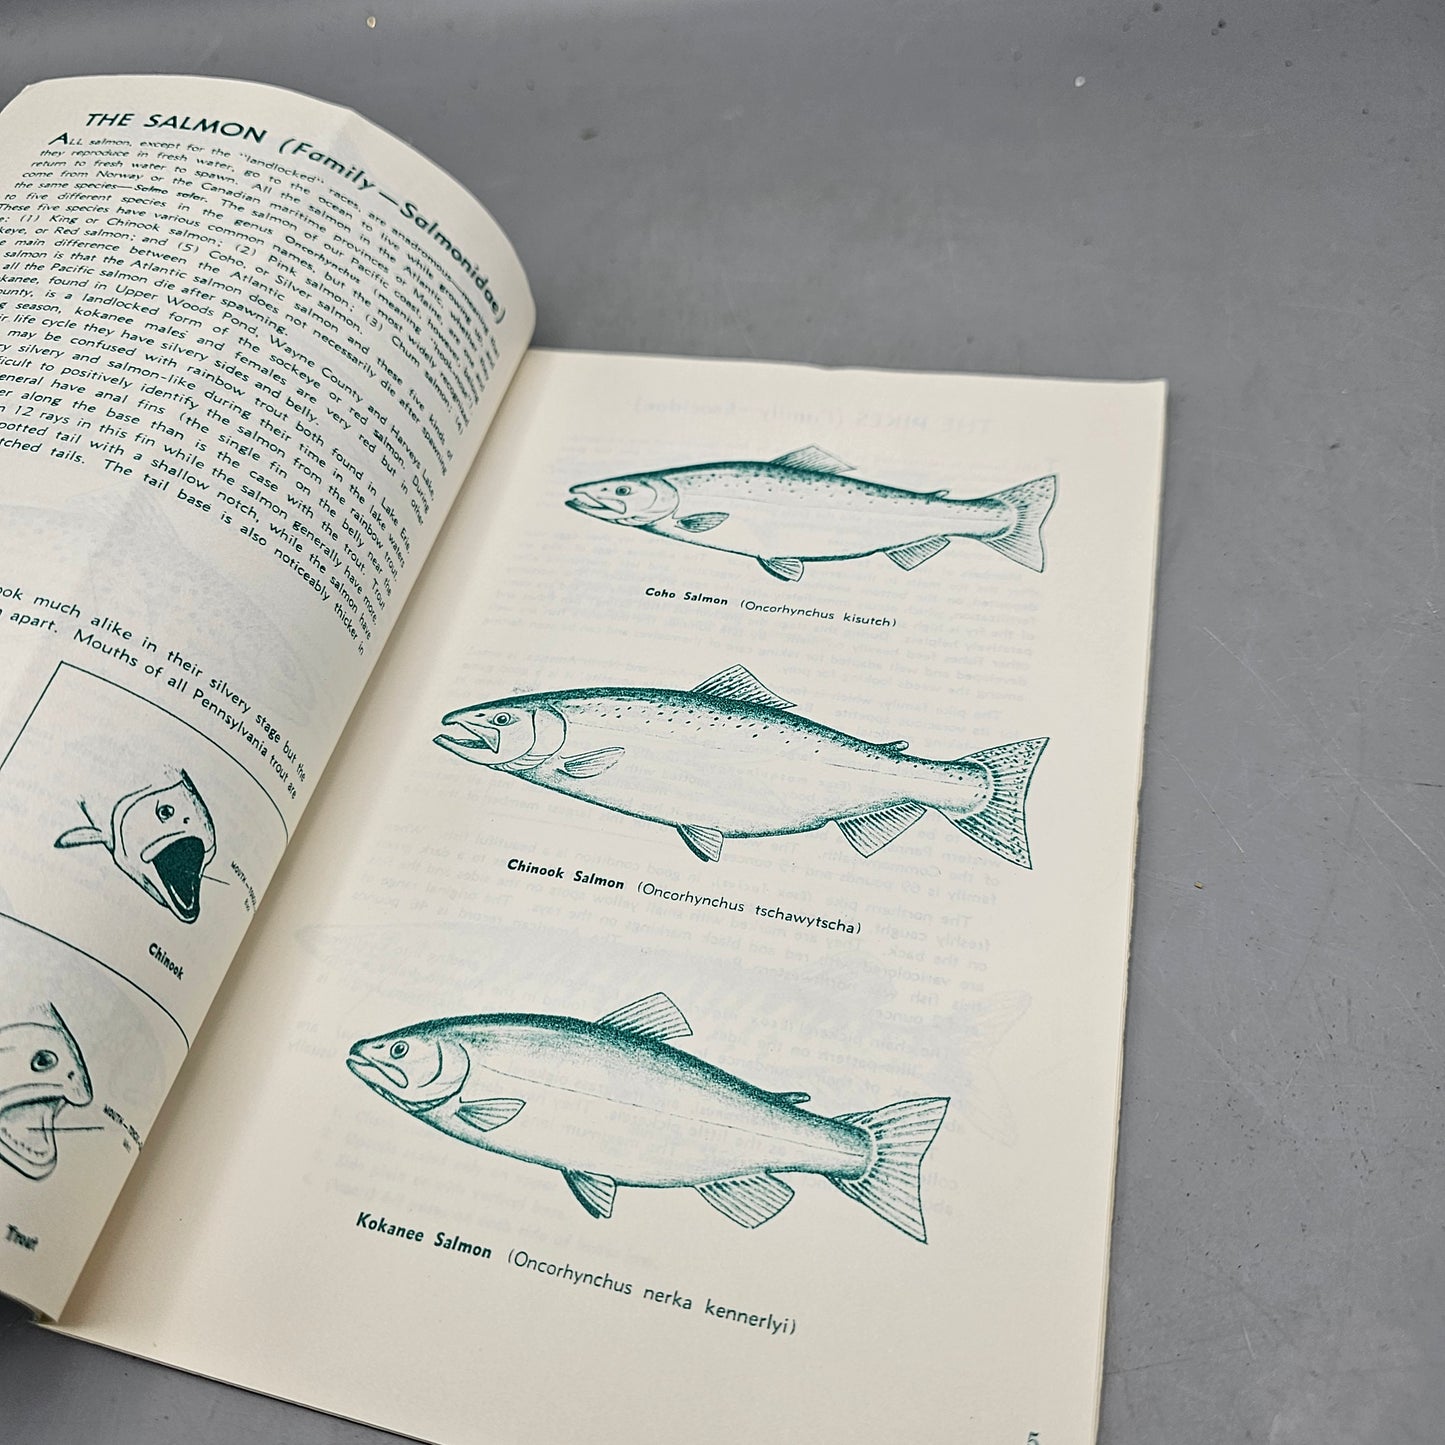 Vintage Book "Identifying The Common Fishes Of Pennsylvania" By Buss And Miller